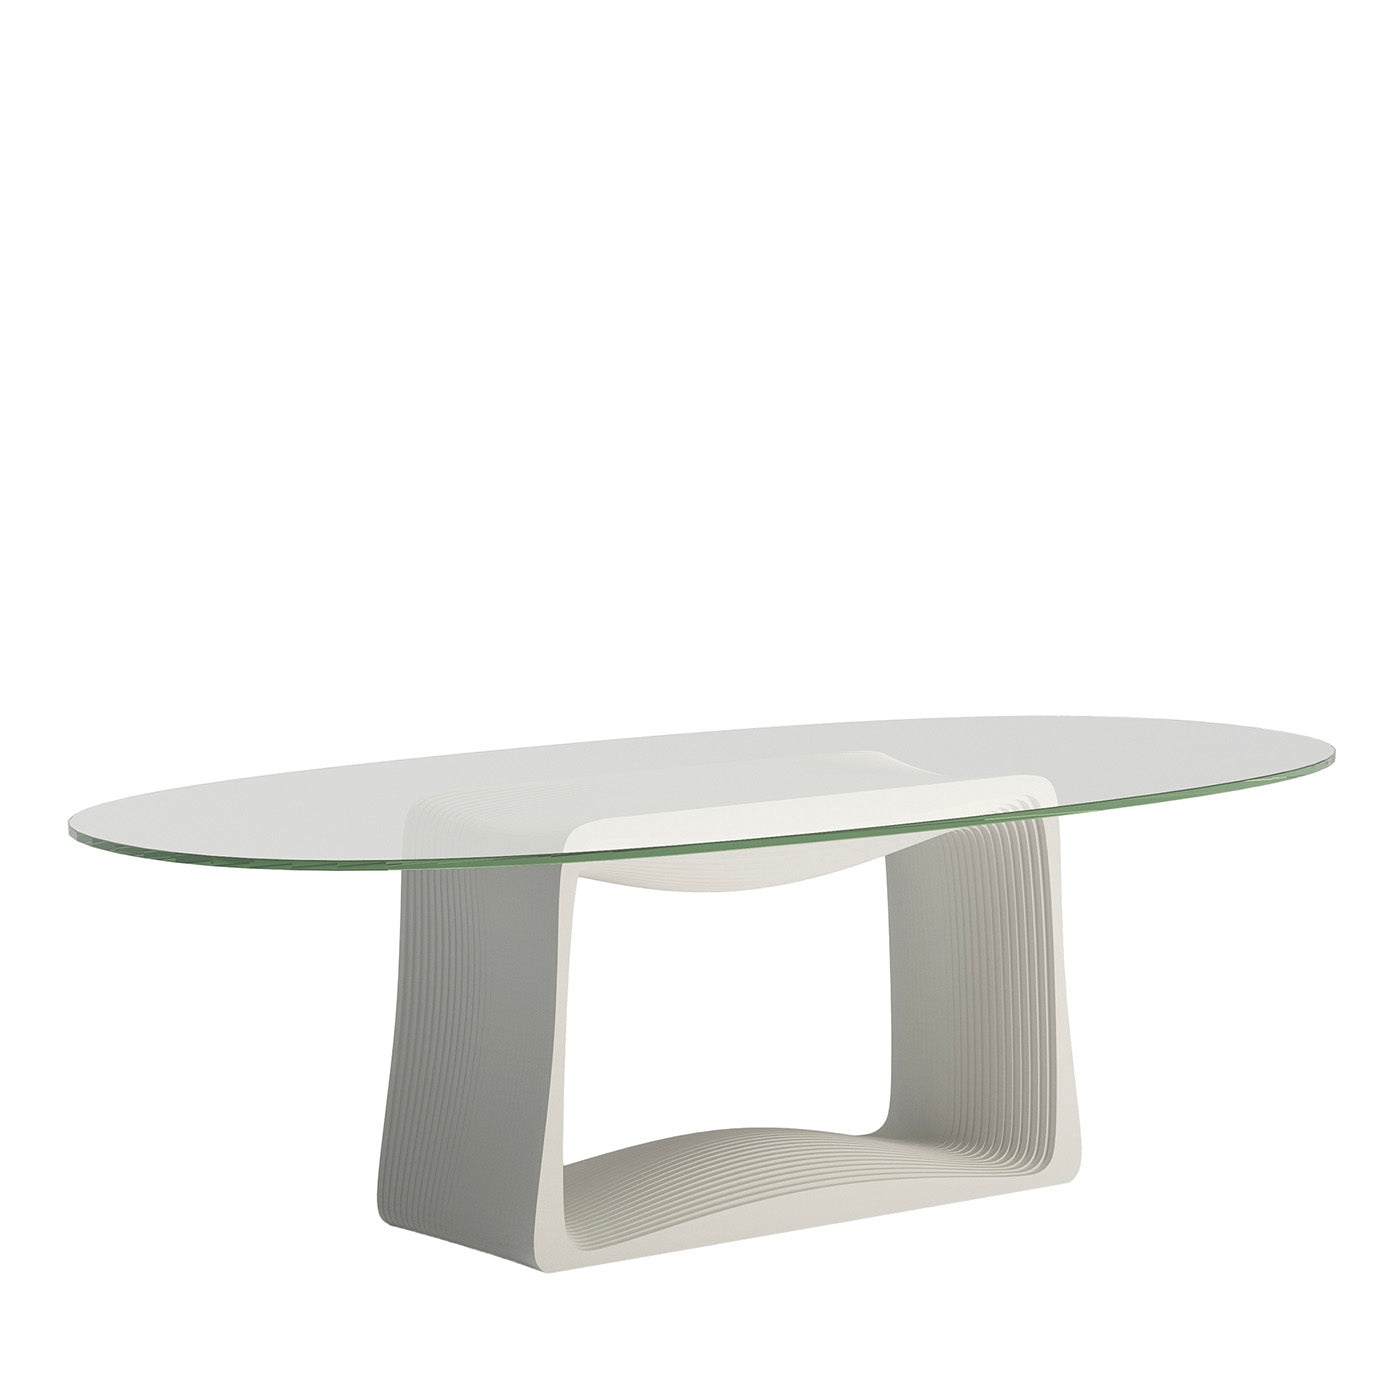 Layer Crystal & White Oval Table by Franco Poli - Main view